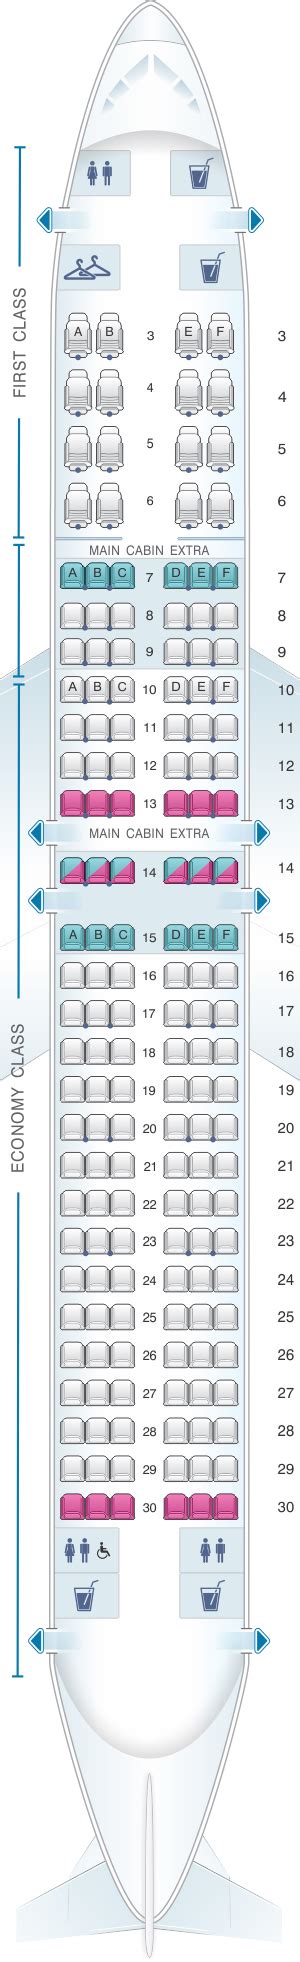 For your next American Airlines flight, use this seating chart to get the most comfortable seats ... American Airlines > Planes & Seat Maps > American Airlines Seat Maps. Overview; Planes & Seat Maps. ... Airbus A330-200 (332) Boeing 737 MAX 8 (7M8) Boeing 737-800 (738) Layout 1; Boeing 737-800 (738) Layout 2; Boeing 777-200 (777) Boeing …. 